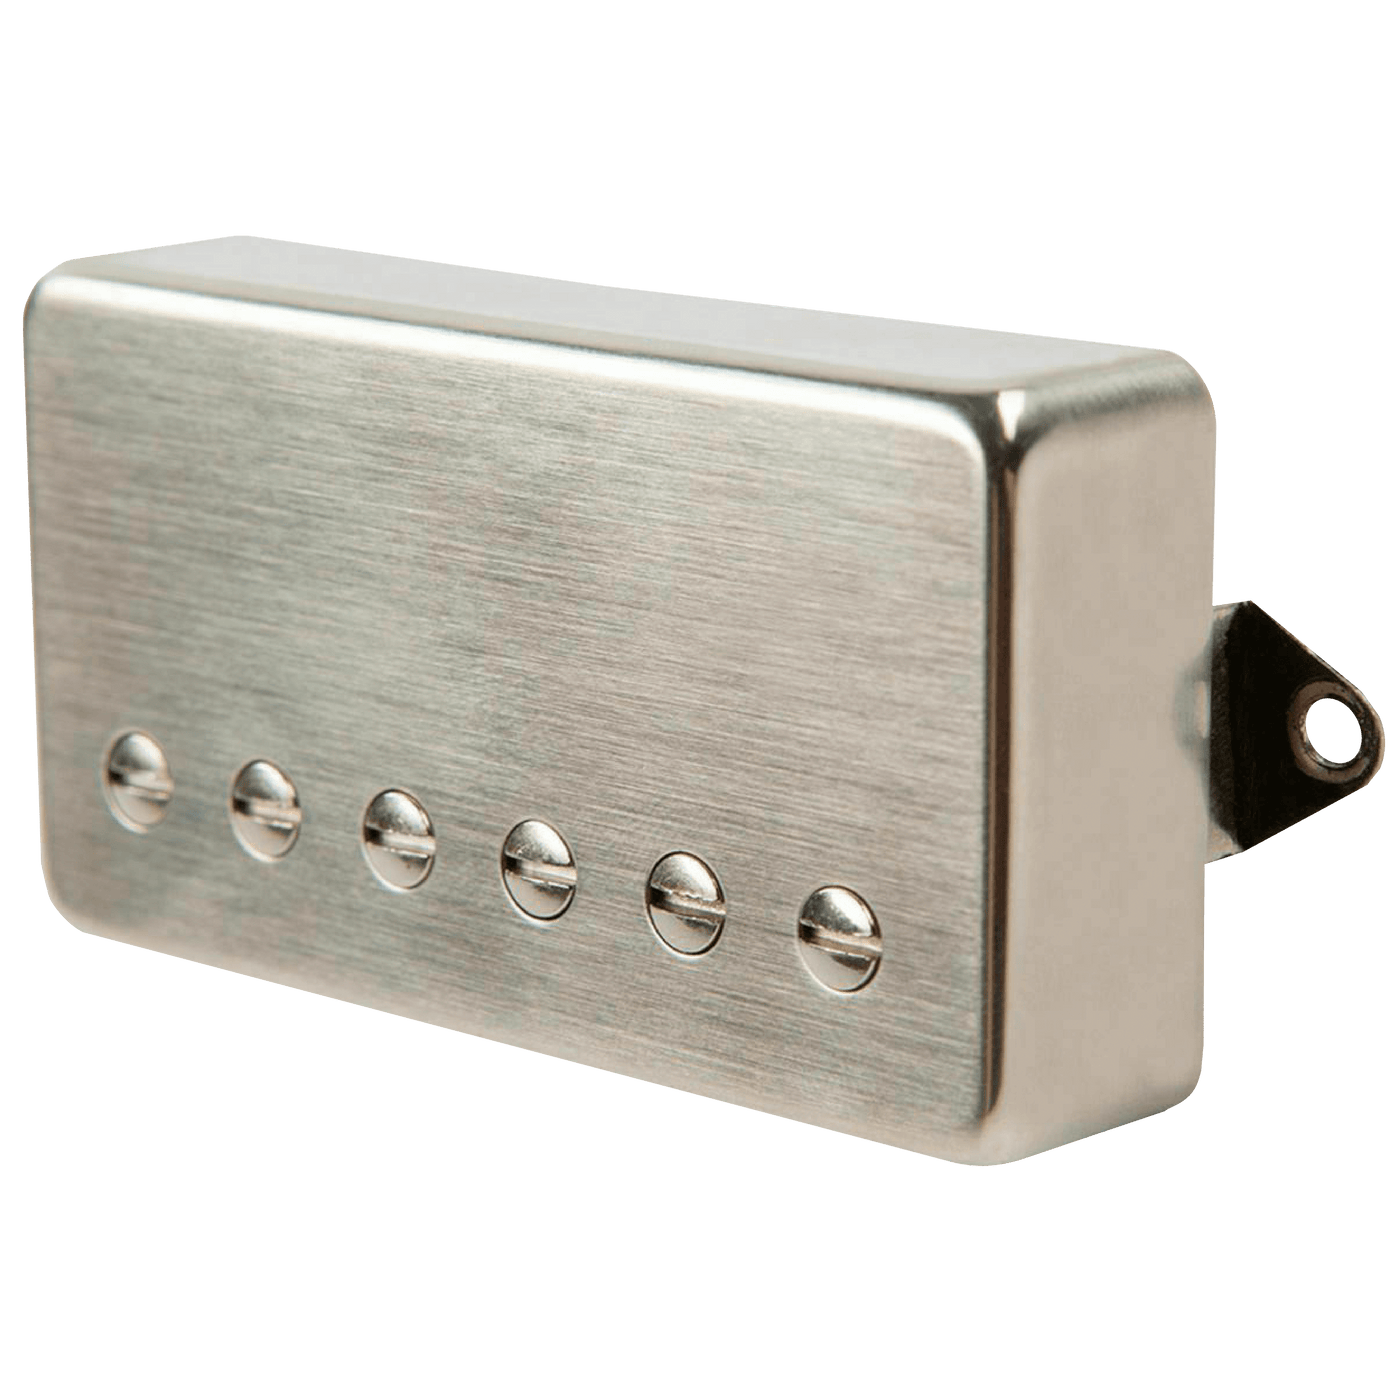 Suhr SSV Humbucker Nickel Chrome (Neck) - $179990 - Gearhub - “We are happy to introduce the new Thornbucker + bridge pickup. It retains all the clarity, warmth, character, and mojo of the original Thornbuckers, and adds a bit more power and oomph. Great for players that like a slightly overwound PAF-type tone!”. “We’re overjoyed with the enthusiasm from players for the Thornbucker humbucking pickups! The pickups have been a resounding success, garnering praise for their extraordinary tone and balance. I’m